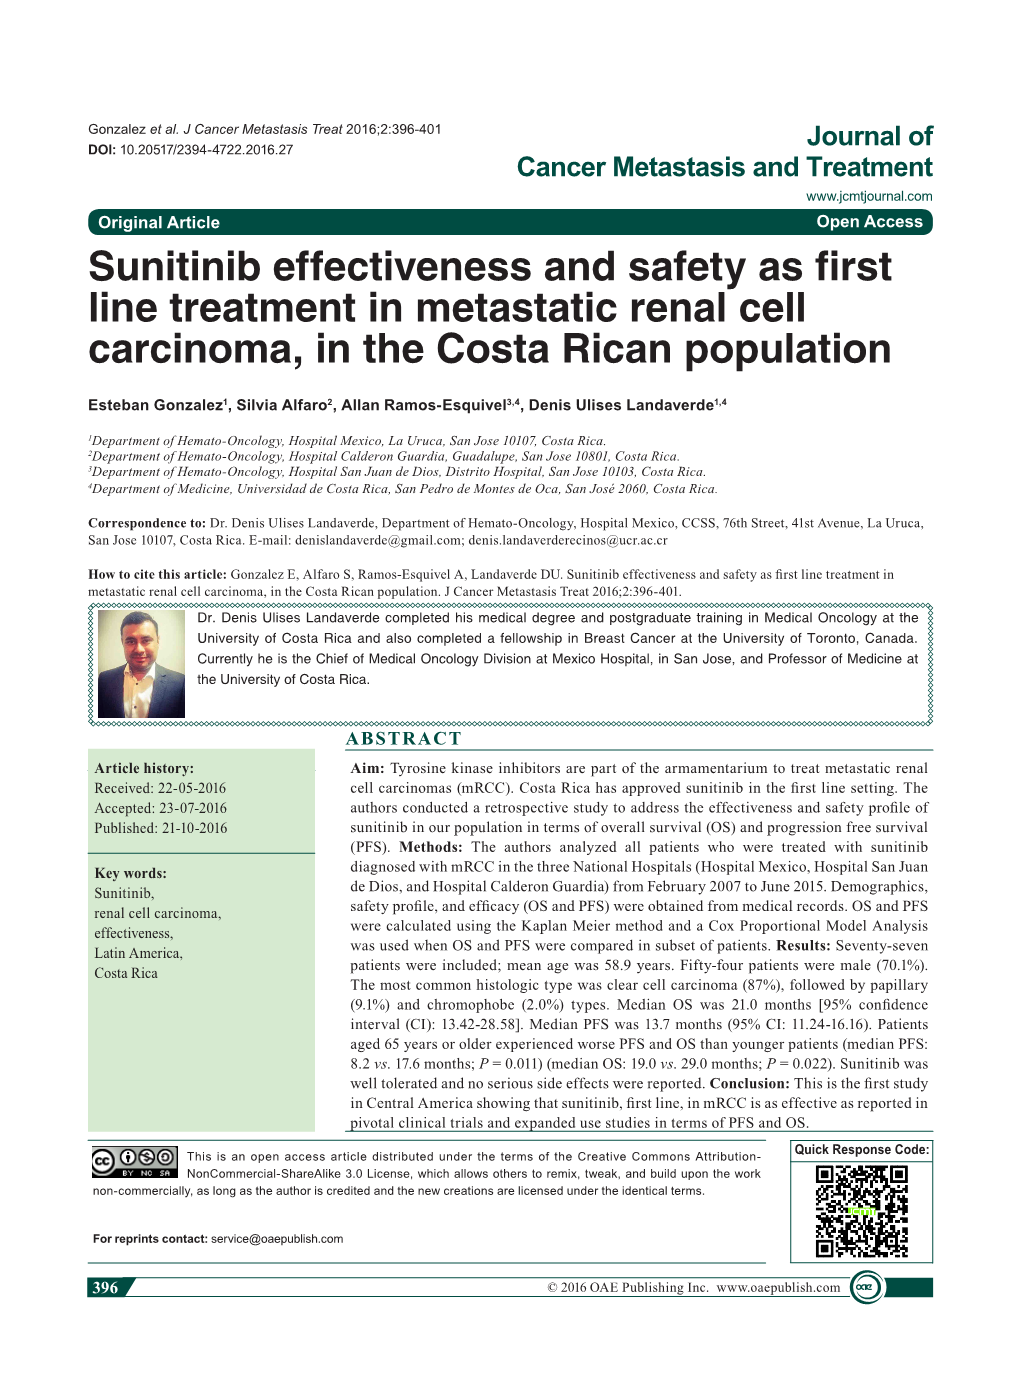 Sunitinib Effectiveness and Safety As First Line Treatment in Metastatic Renal Cell Carcinoma, in the Costa Rican Population